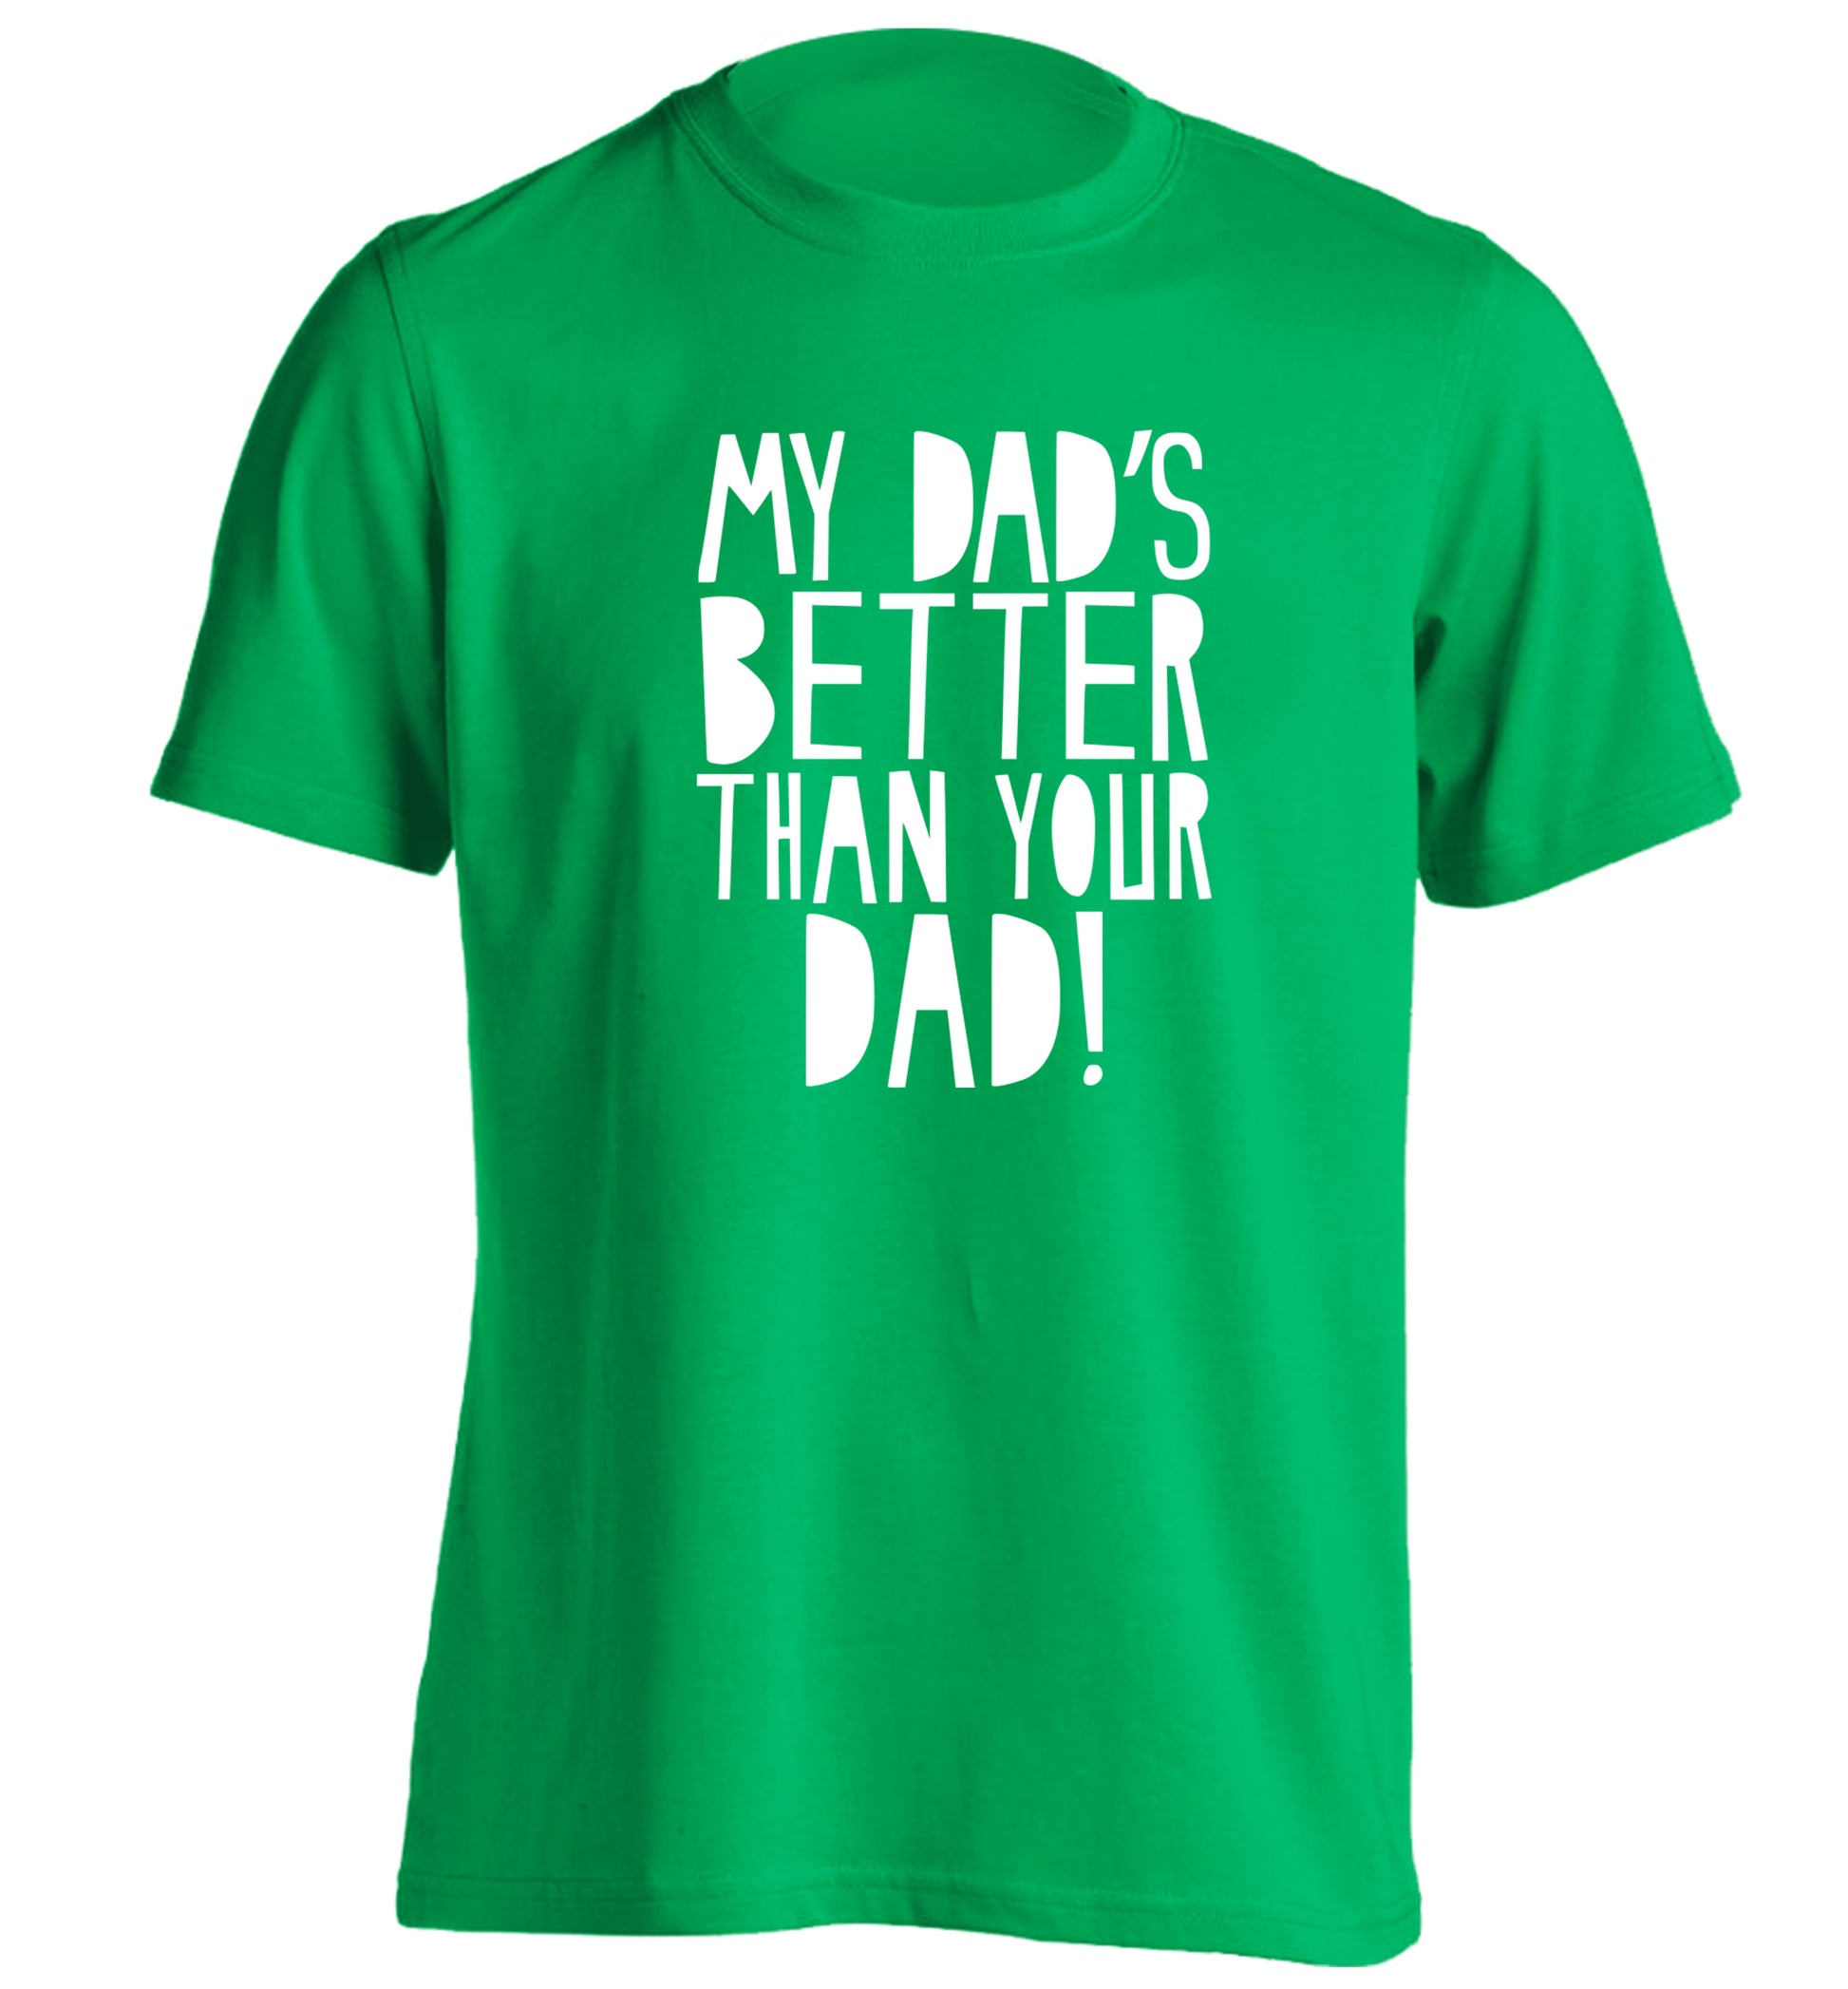 My dad's better than your dad adults unisex green Tshirt 2XL